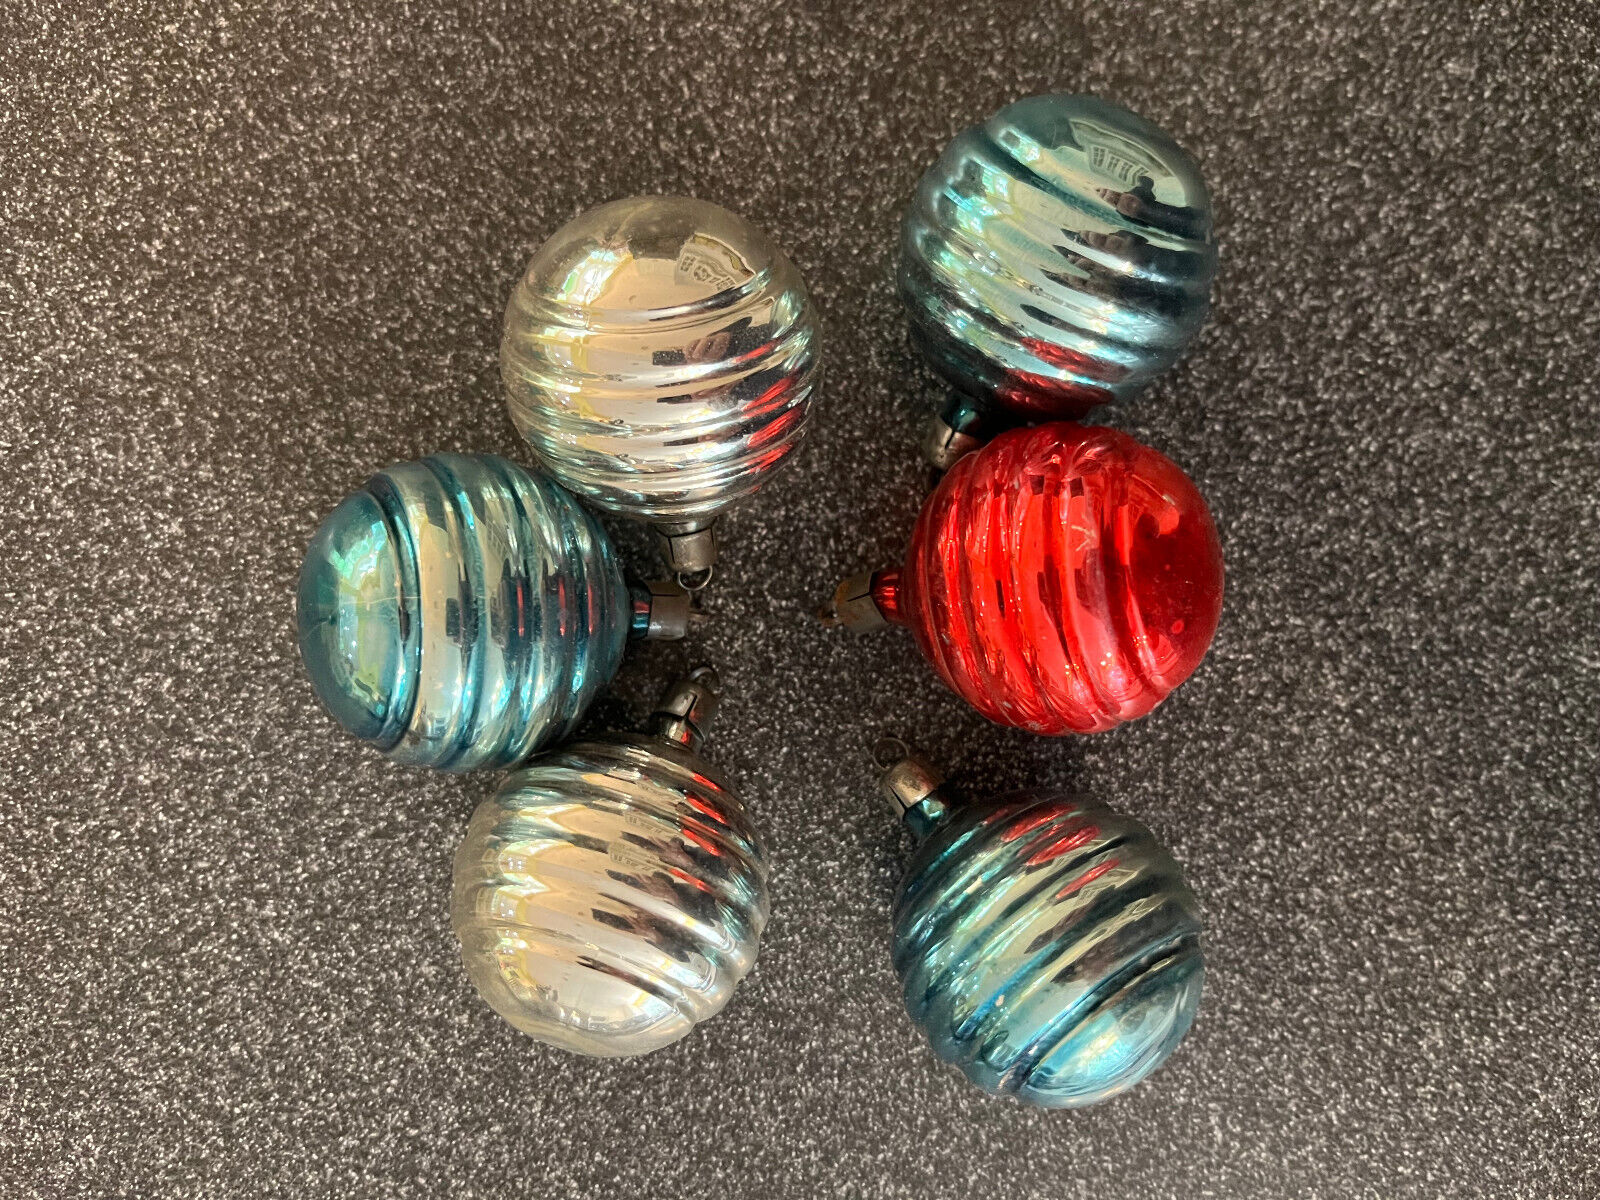 6 Qty. Vtg Ribbed Ball Ornaments made by Premier